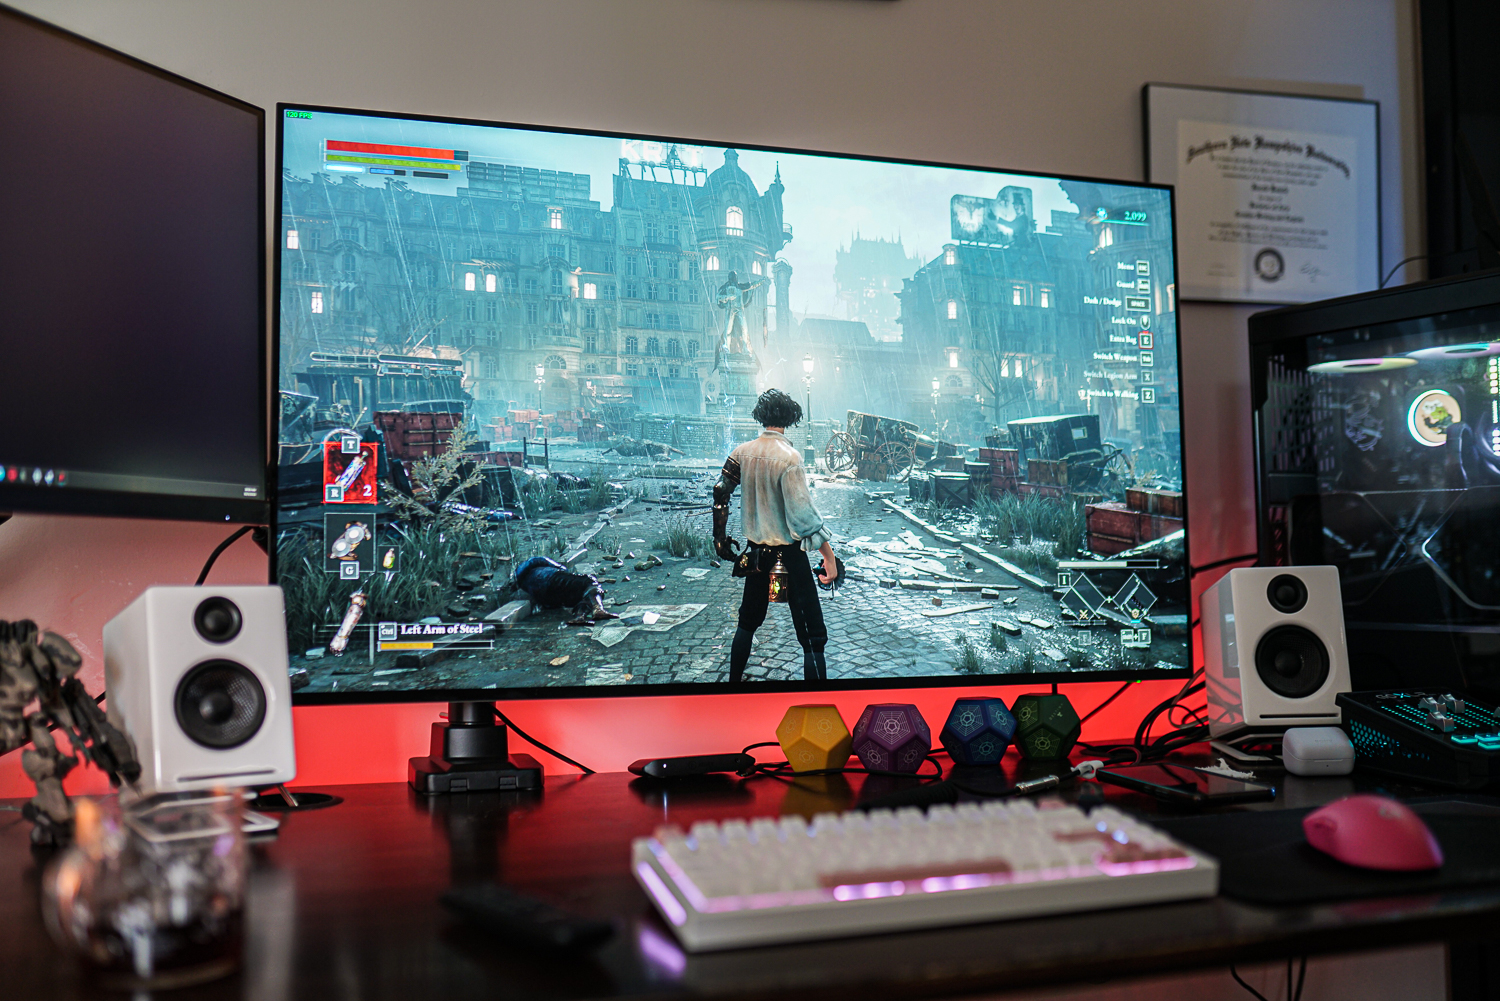 The Advantage of Using an Ultrawide Gaming Monitor